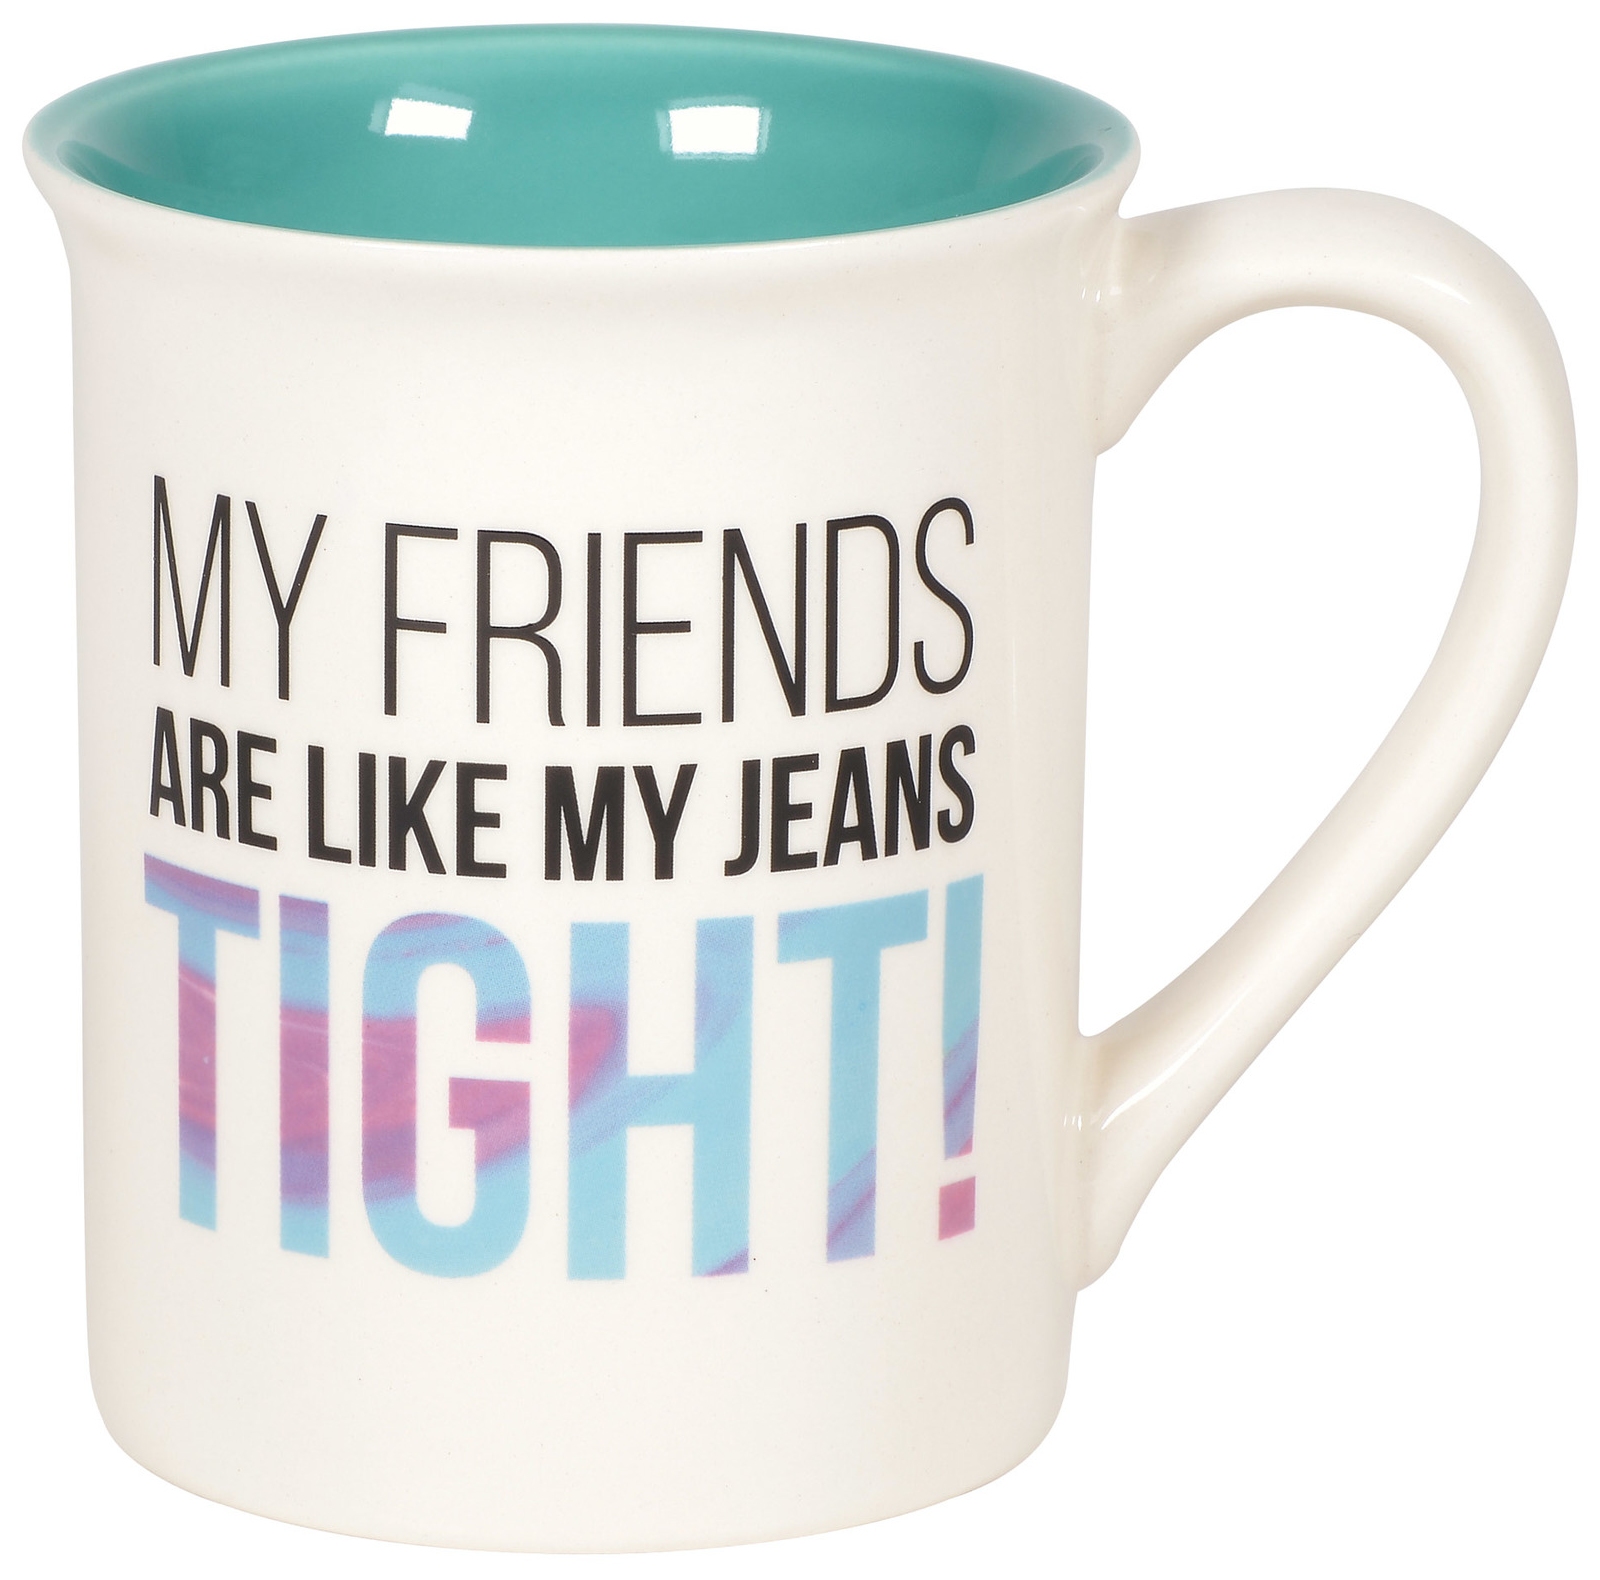 Our Name Is Mud 6006210 Jeans Are Like A Tight Friendship Mug